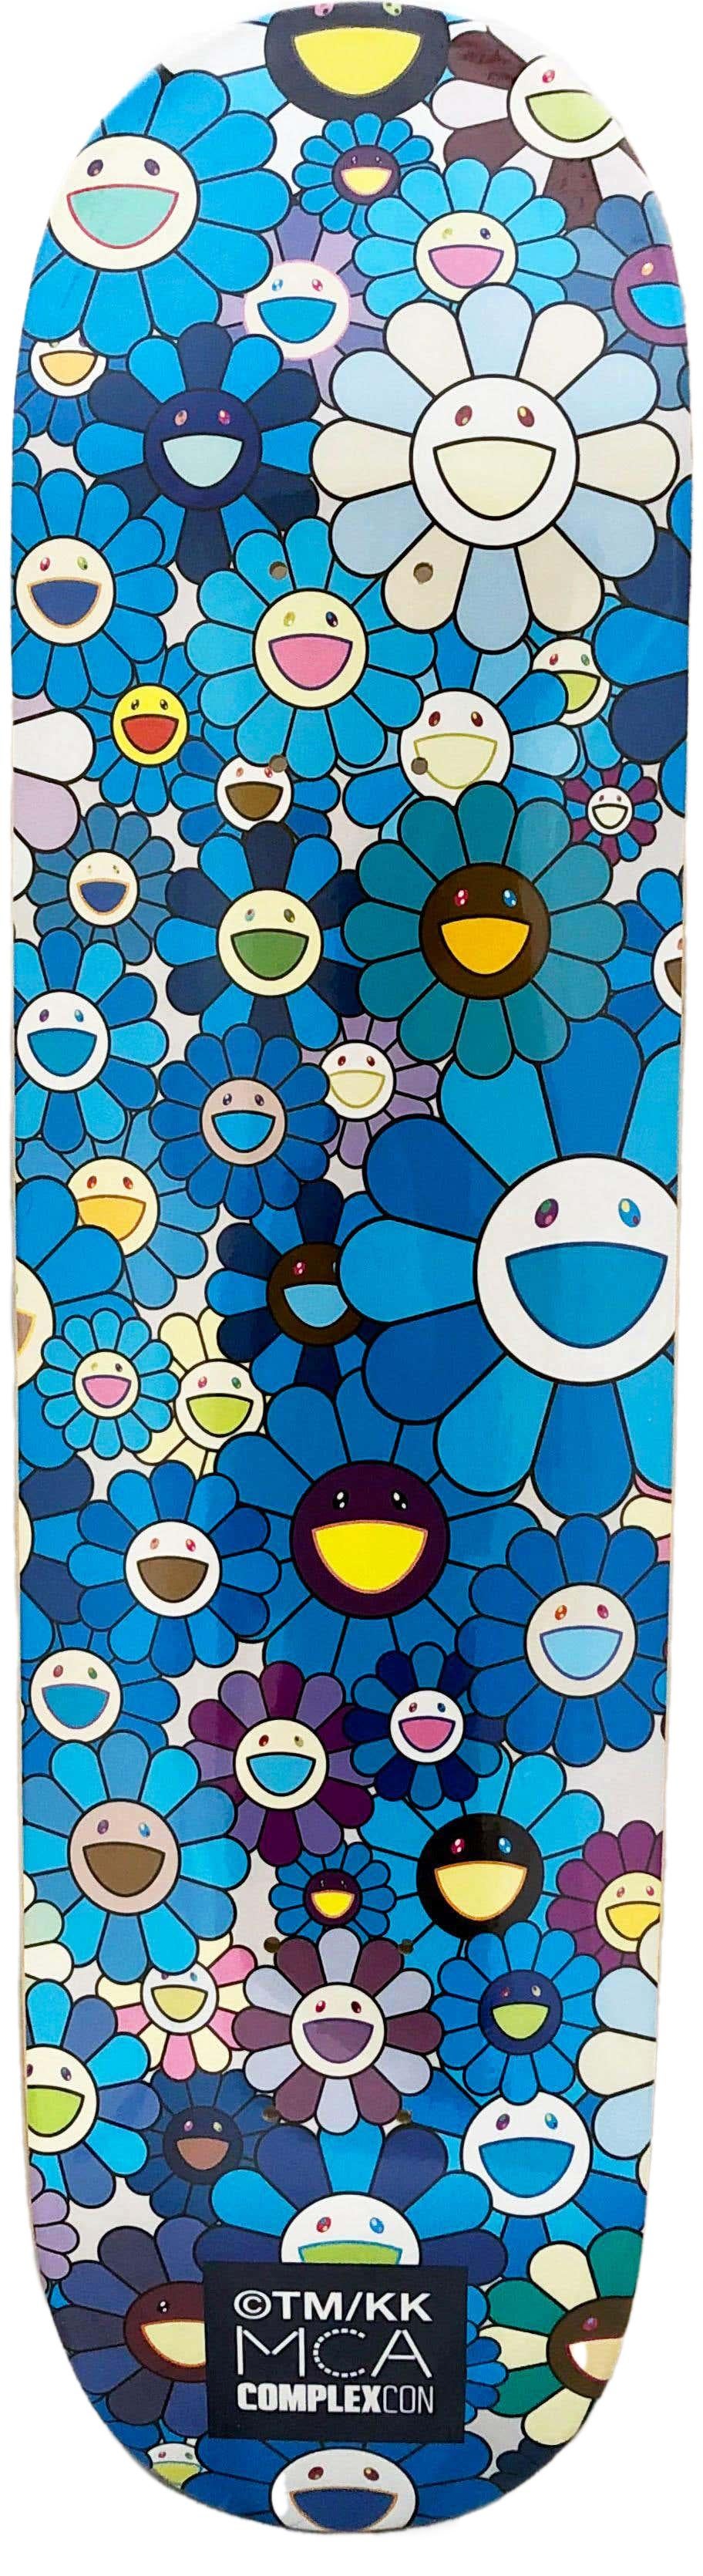 Takashi Murakami Flowers Skateboard Deck:
A vibrant piece of Takashi Murakami wall art produced as a limited series in conjunction with the 2017 Murakami exhibit: The Octopus Eats Its Own Leg, MCA Chicago. This deck is new in its original packaging.